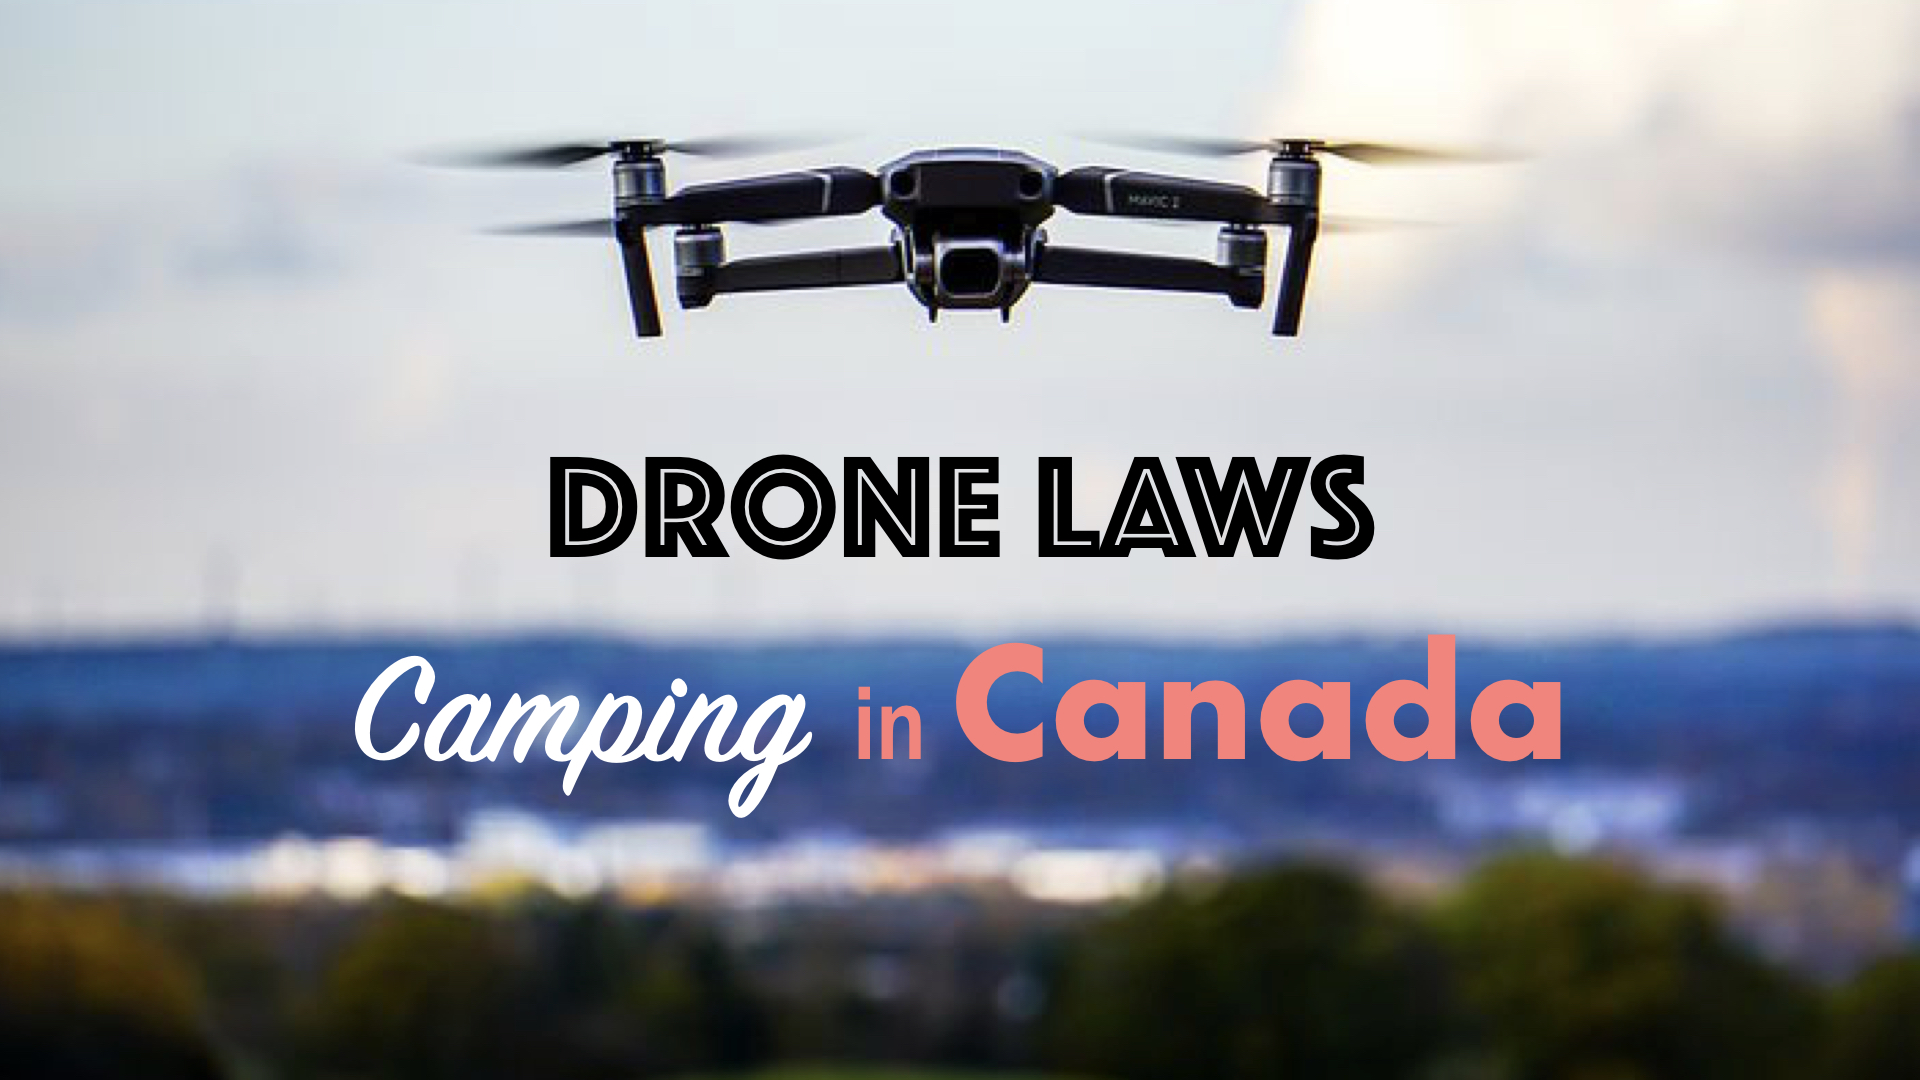 Canada Drone Laws for Camping